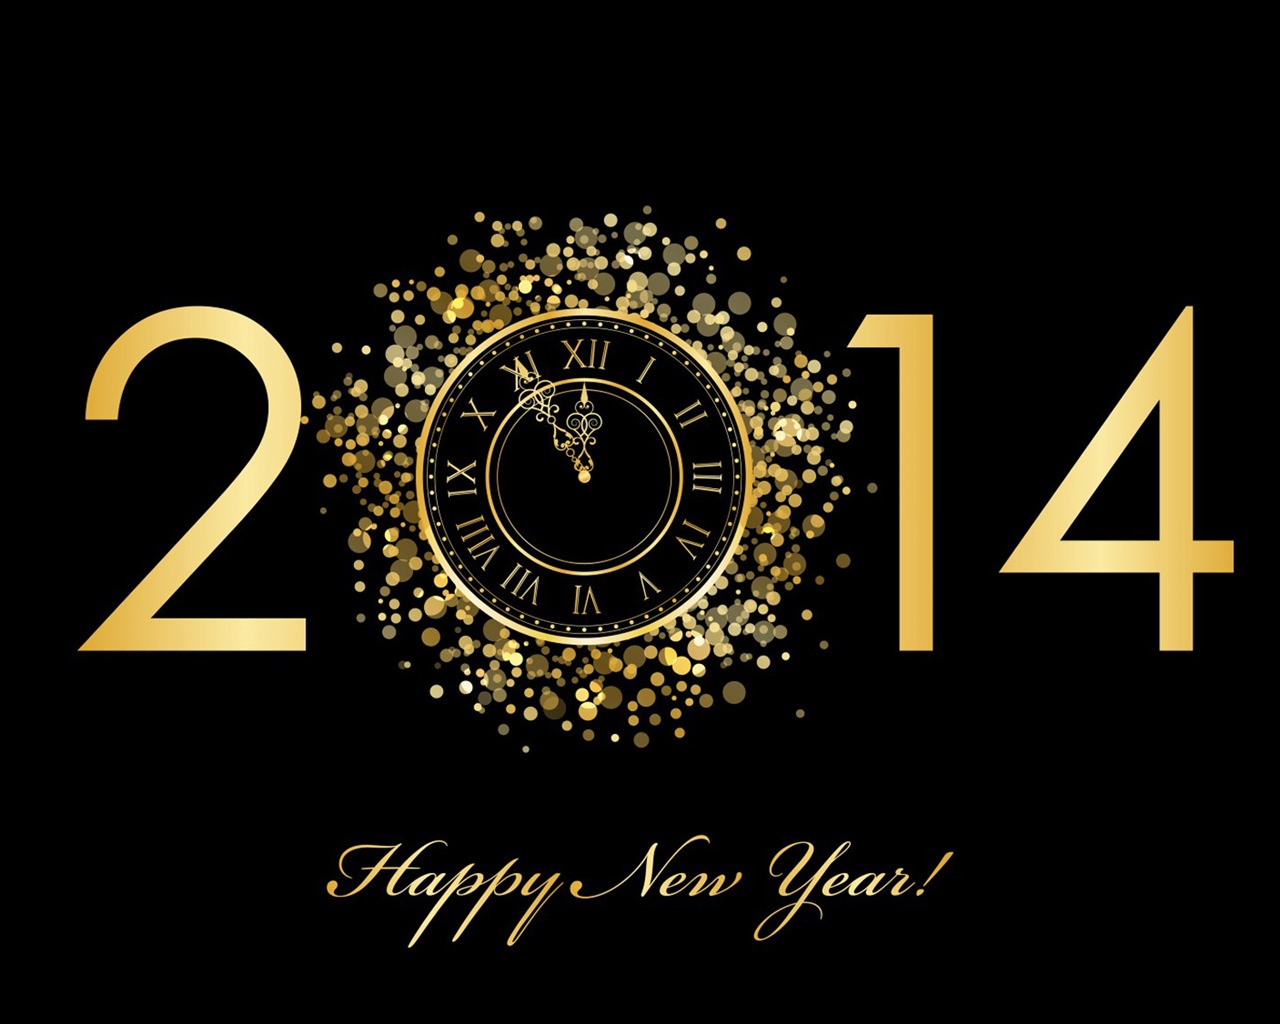 2014 New Year Theme HD Wallpapers (1) #1 - 1280x1024